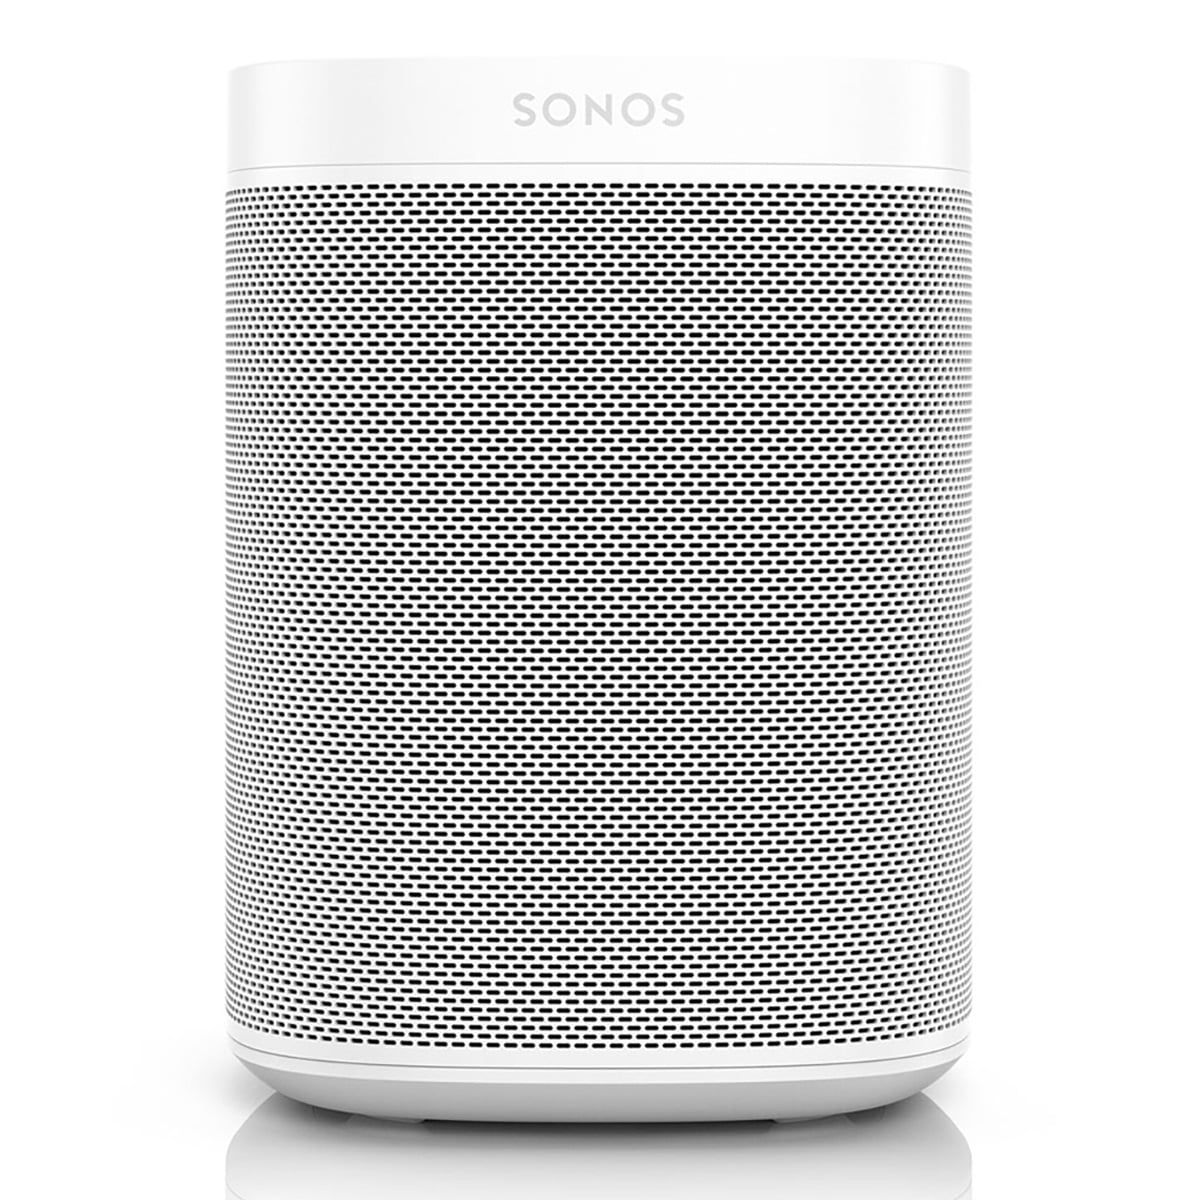 Room Speaker Built-In(Black) Two Gen - 2 Sonos with with Control Smart One Sonos Voice Set